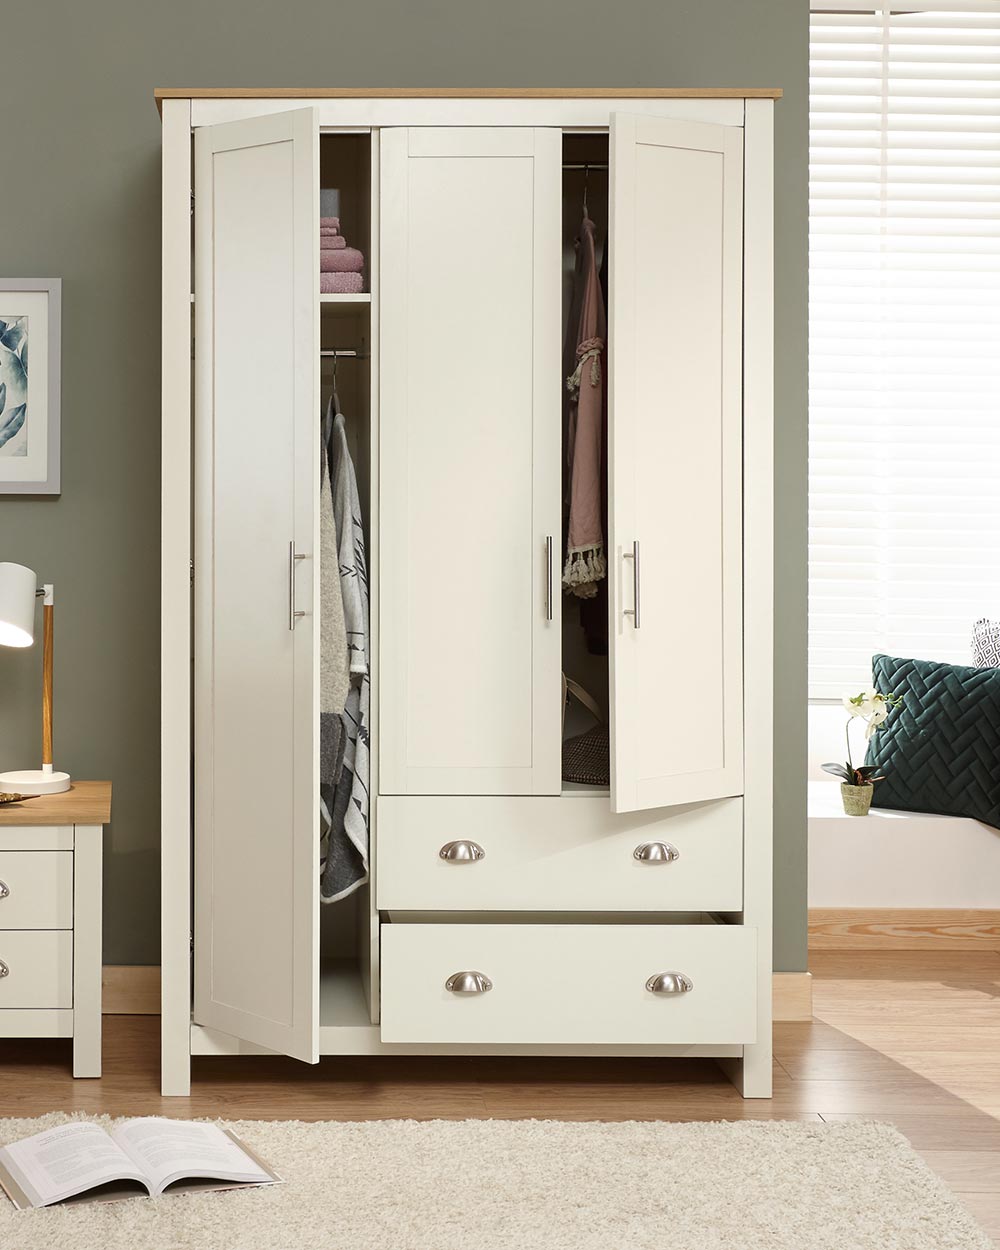 Lancaster 3 door 2 drawer wardrobe shaker style doors in a bedroom lifestyle setting with doors and drawers open